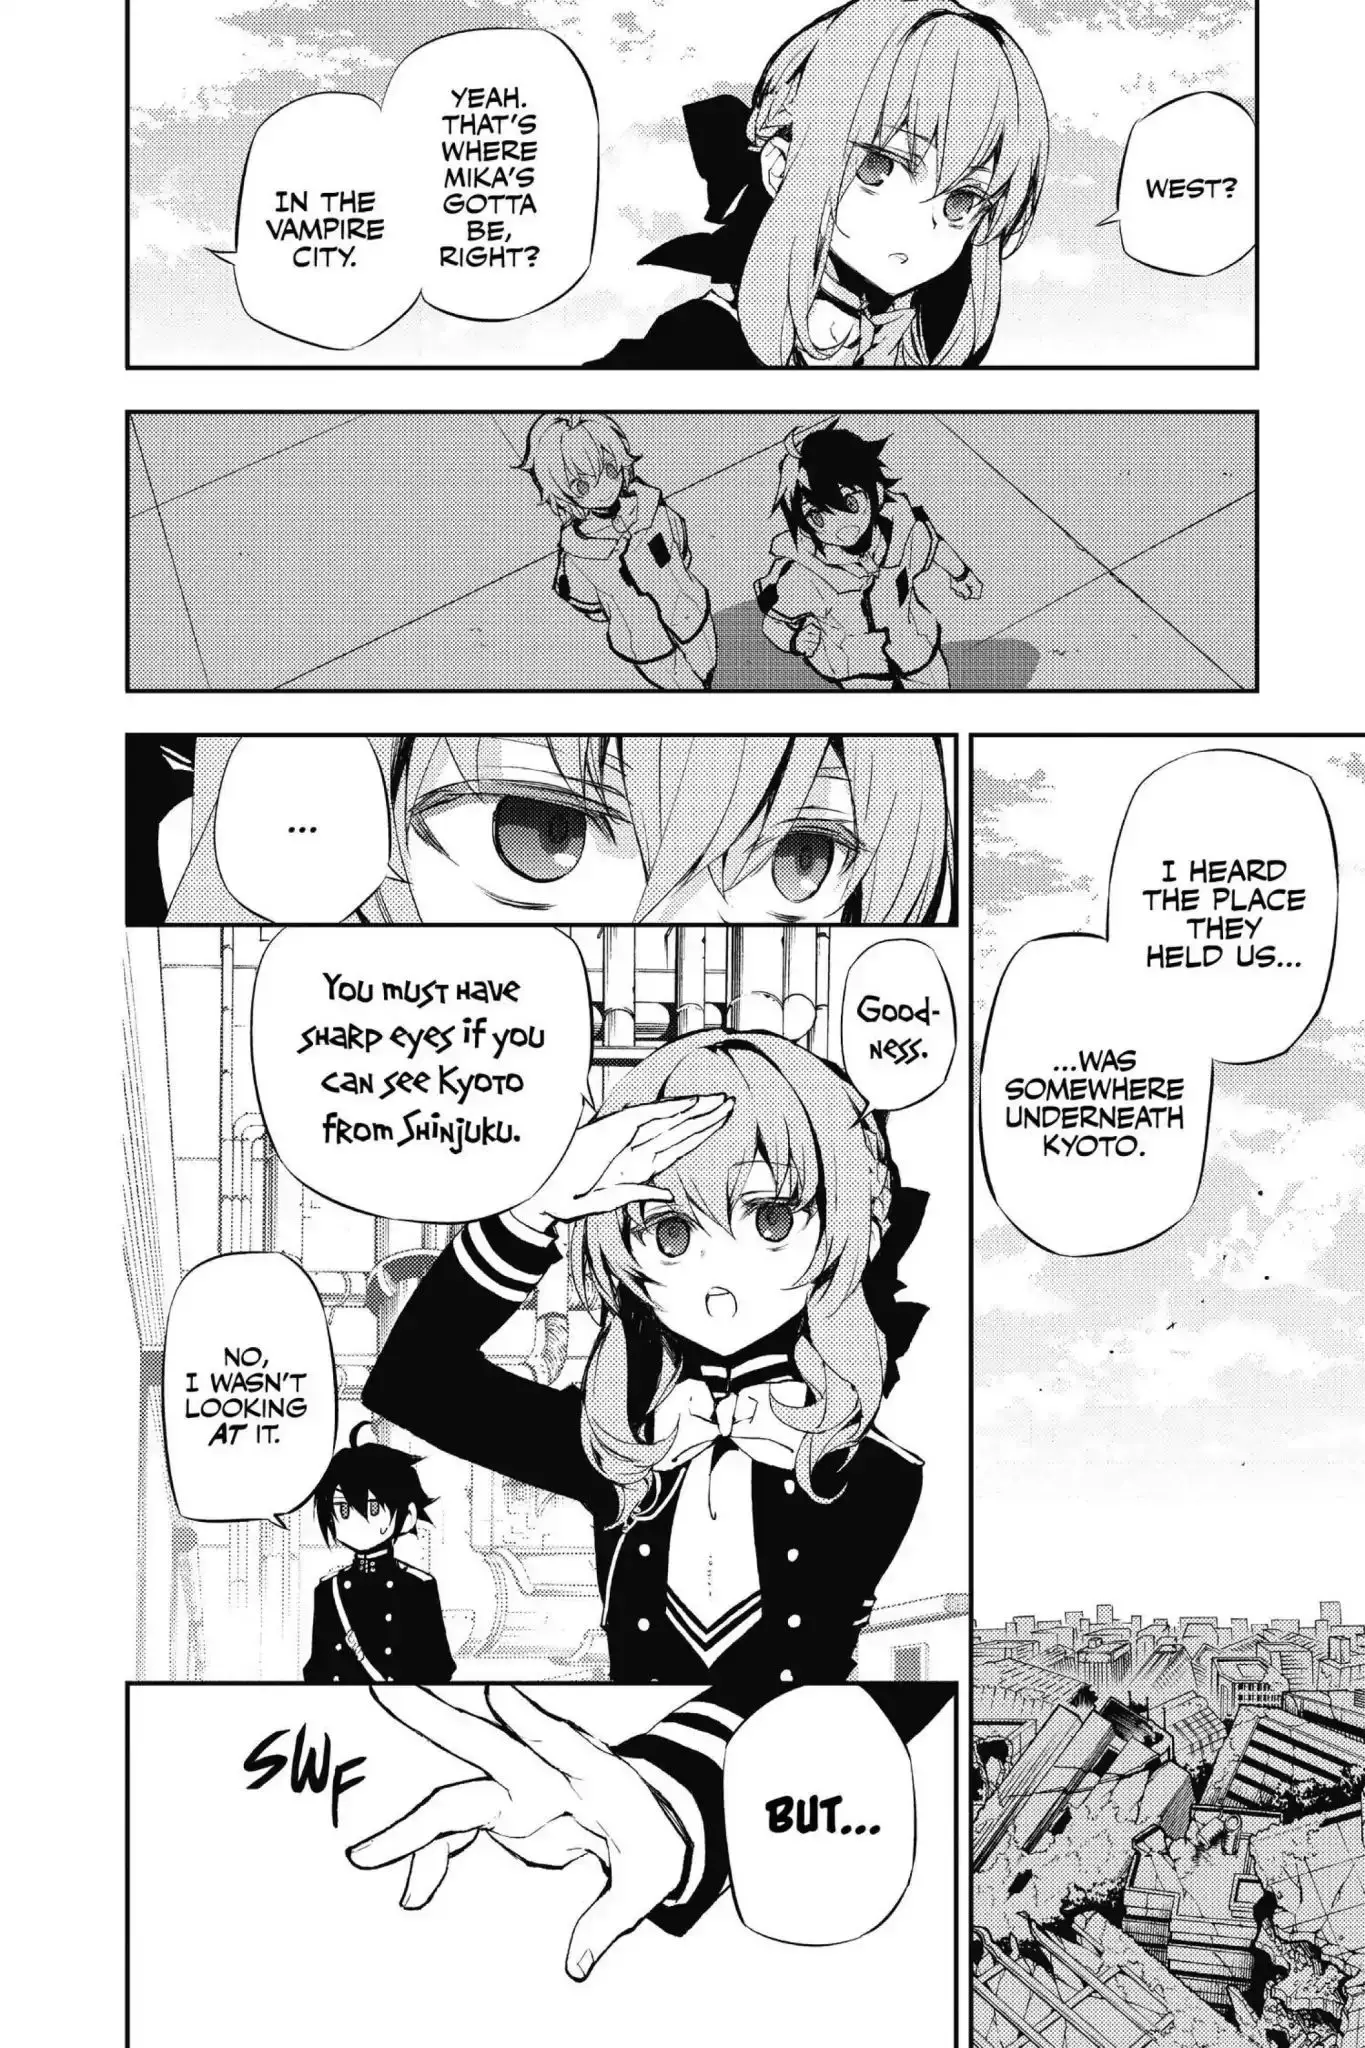 Seraph Of The End - 18 page 6-2351a8b9